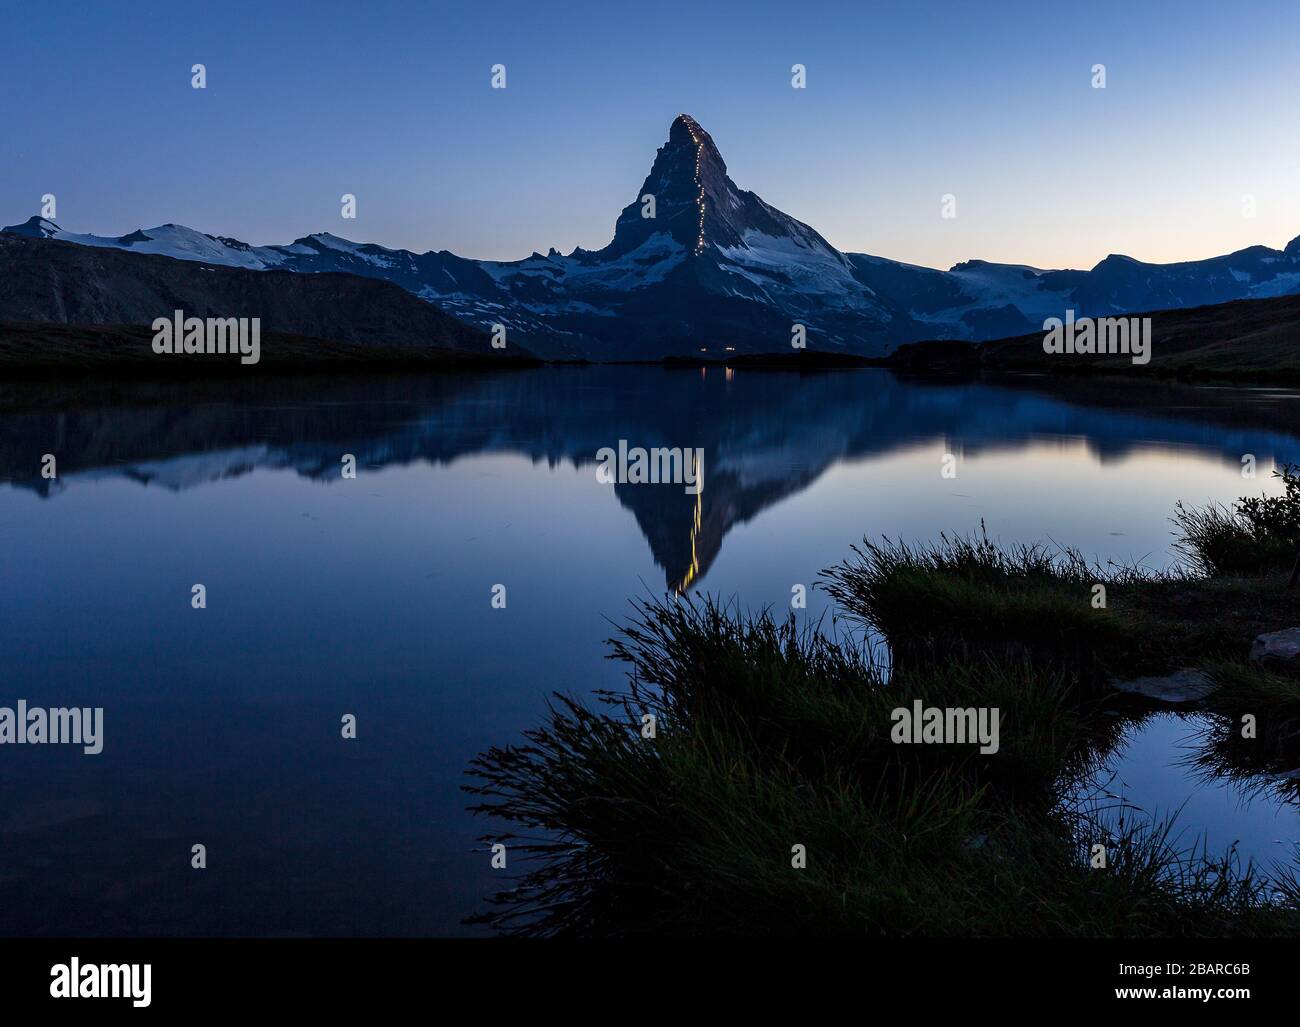 The celebration of 150 years from first ascent of the Matterhorn (Cervino) mountain. Reflection on Lake Stellisee at blue hour. Swiss Alps. Europe. Stock Photo